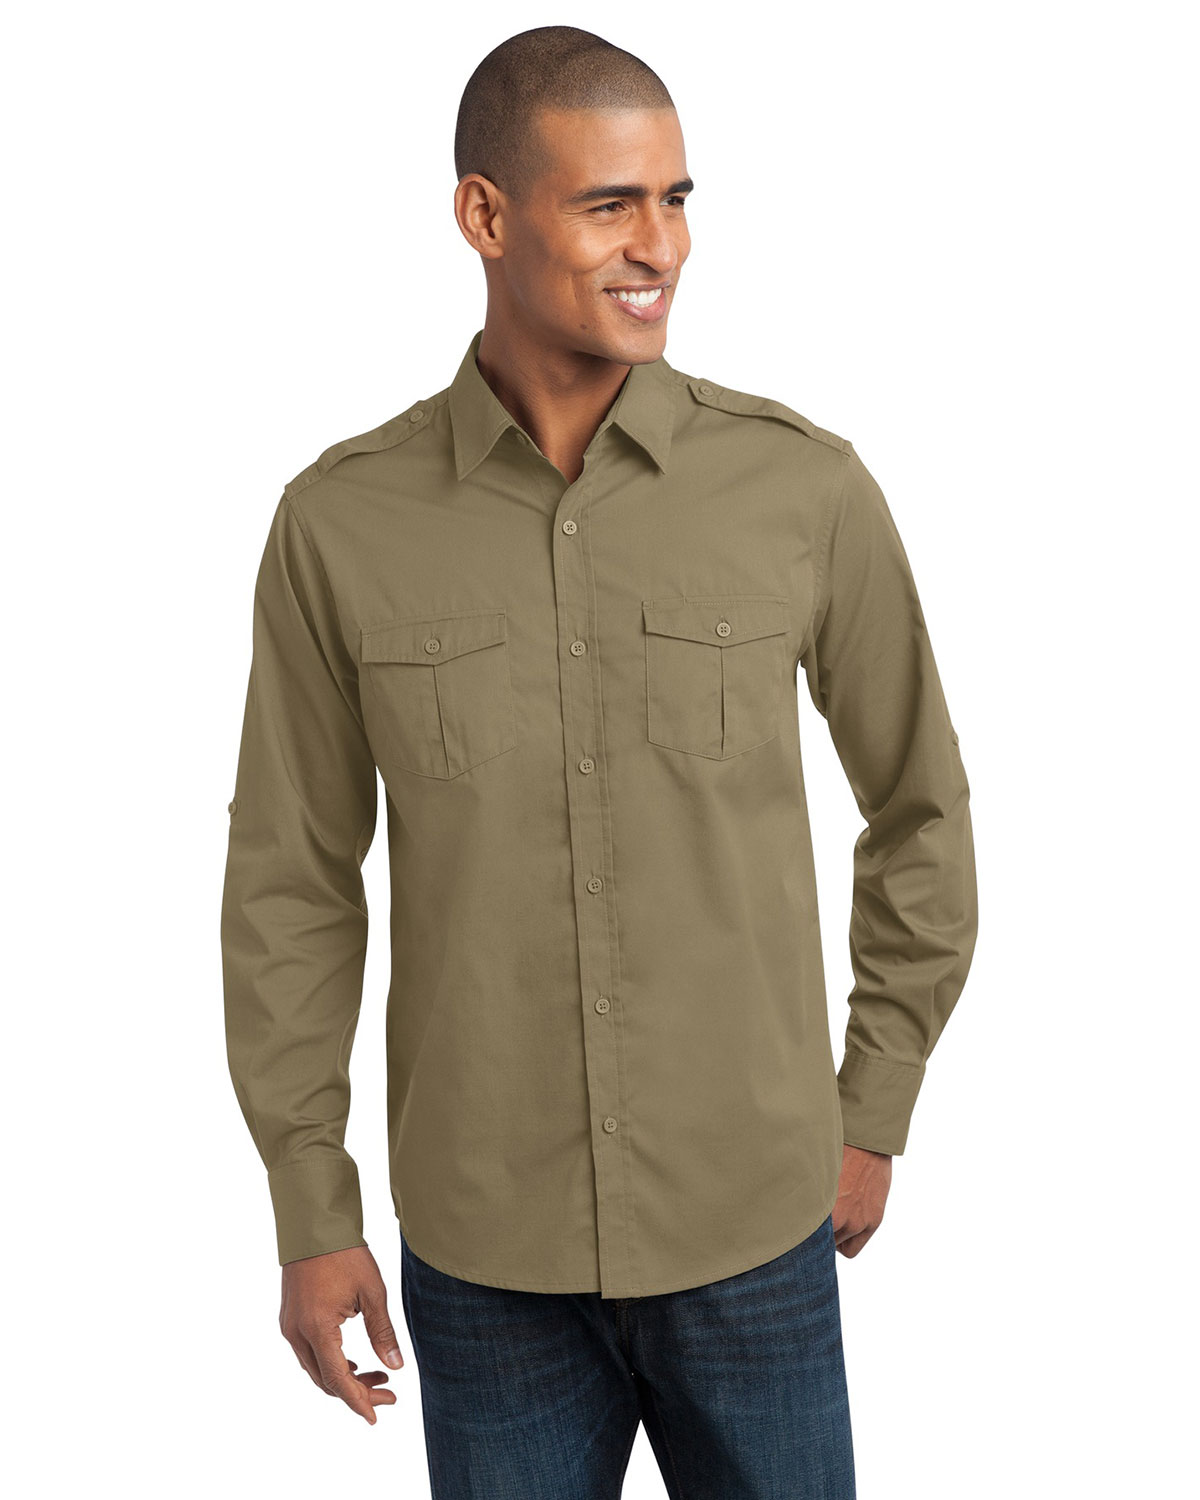 Port Authority S649 Men Stain-Resistant Roll Sleeve Twill Shirt at Apparelstation